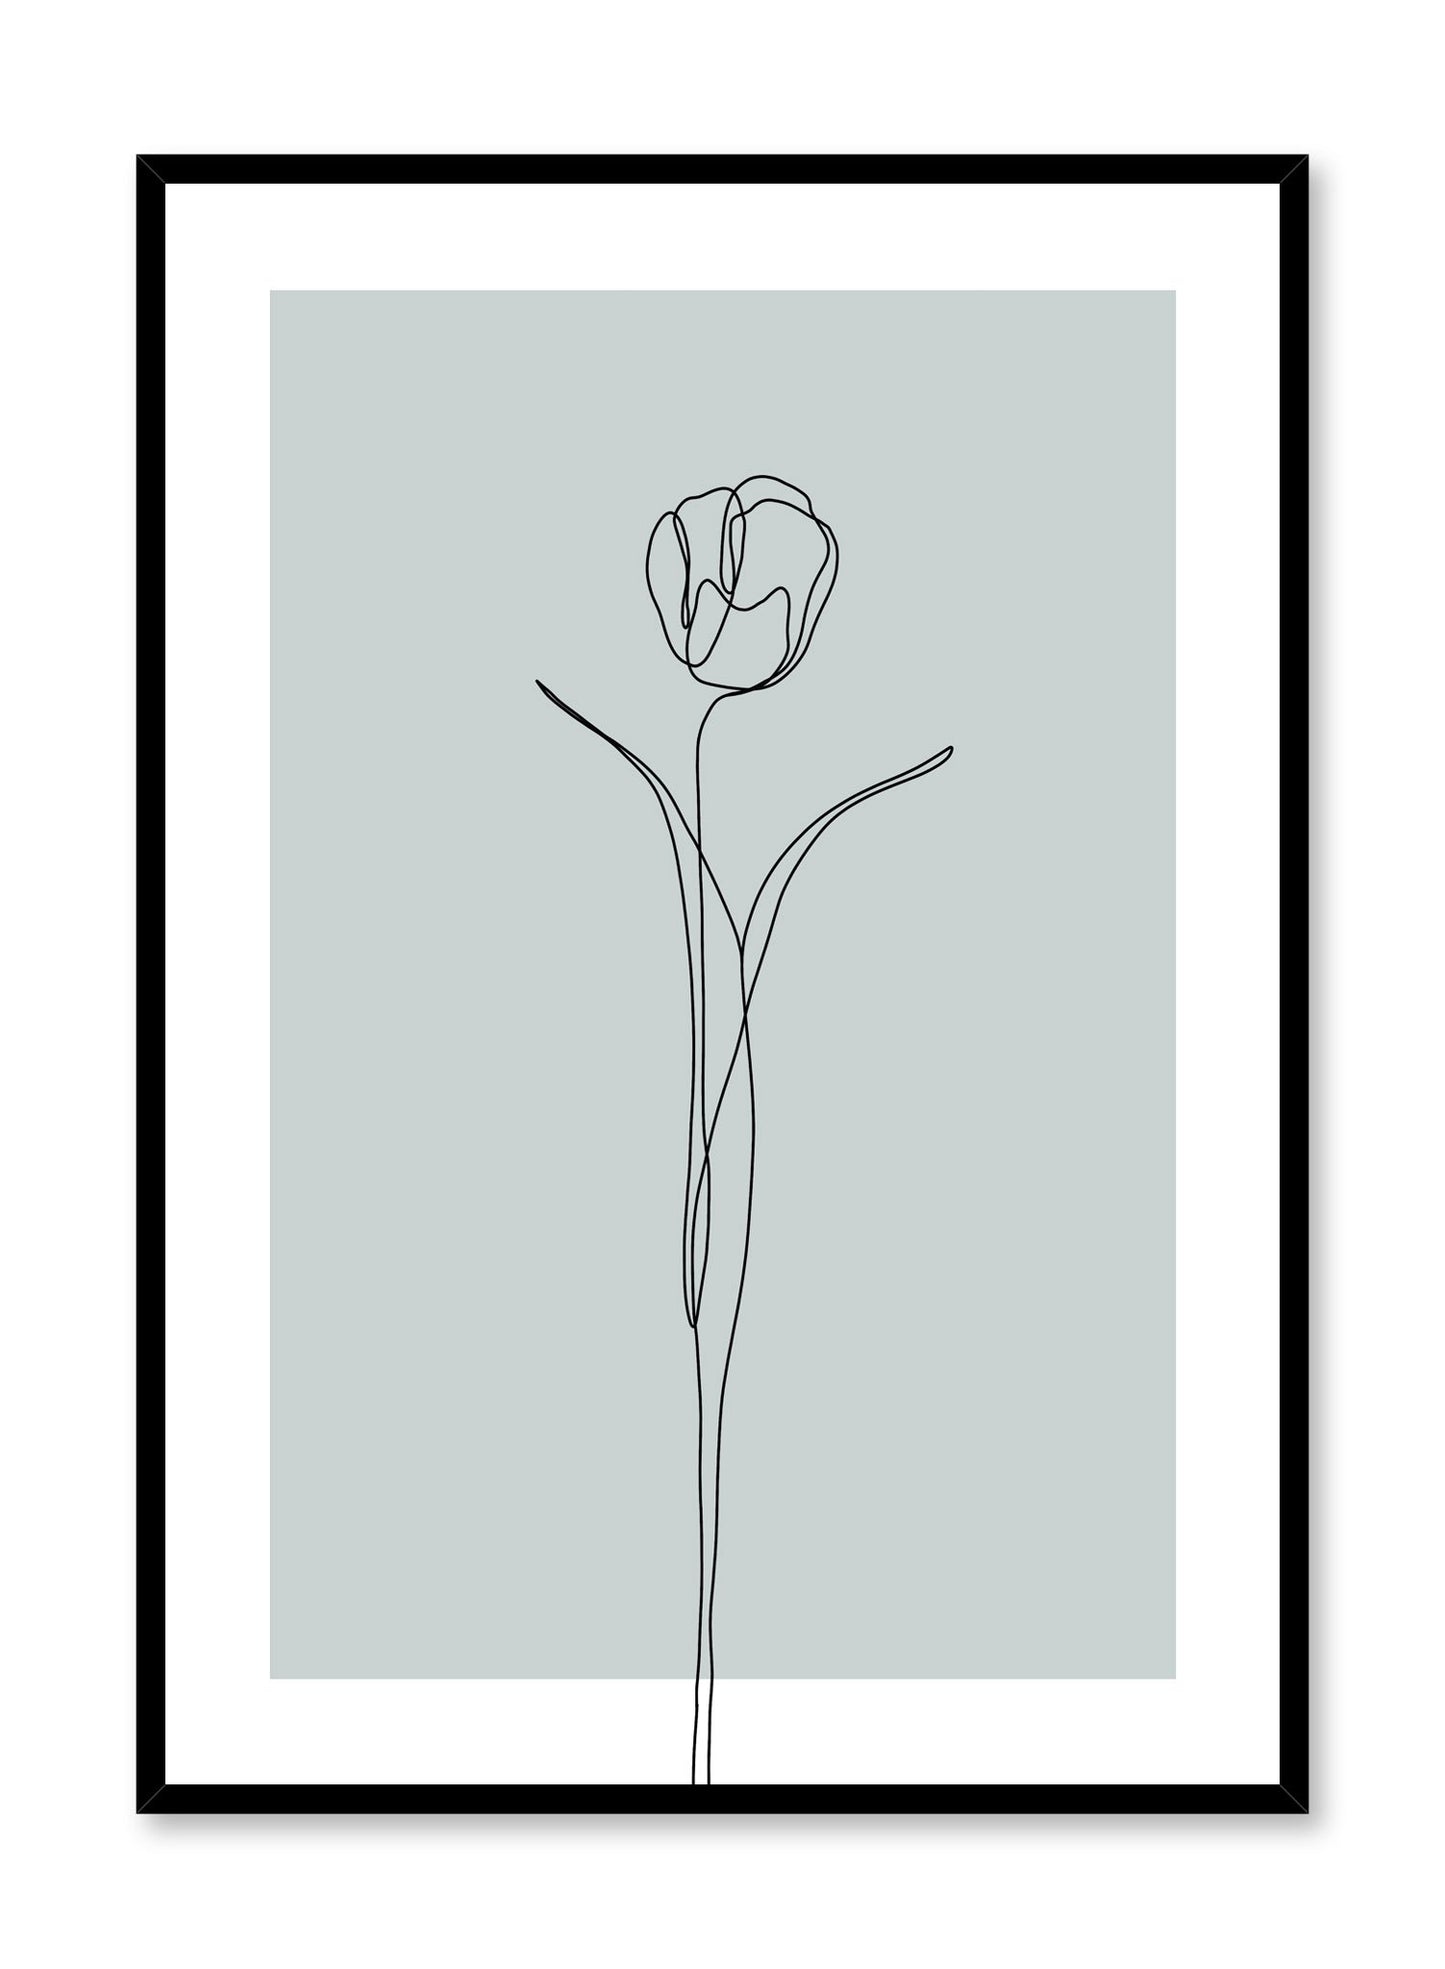 Modern minimalist poster by Opposite Wall with abstract illustration of Tulip in mint green